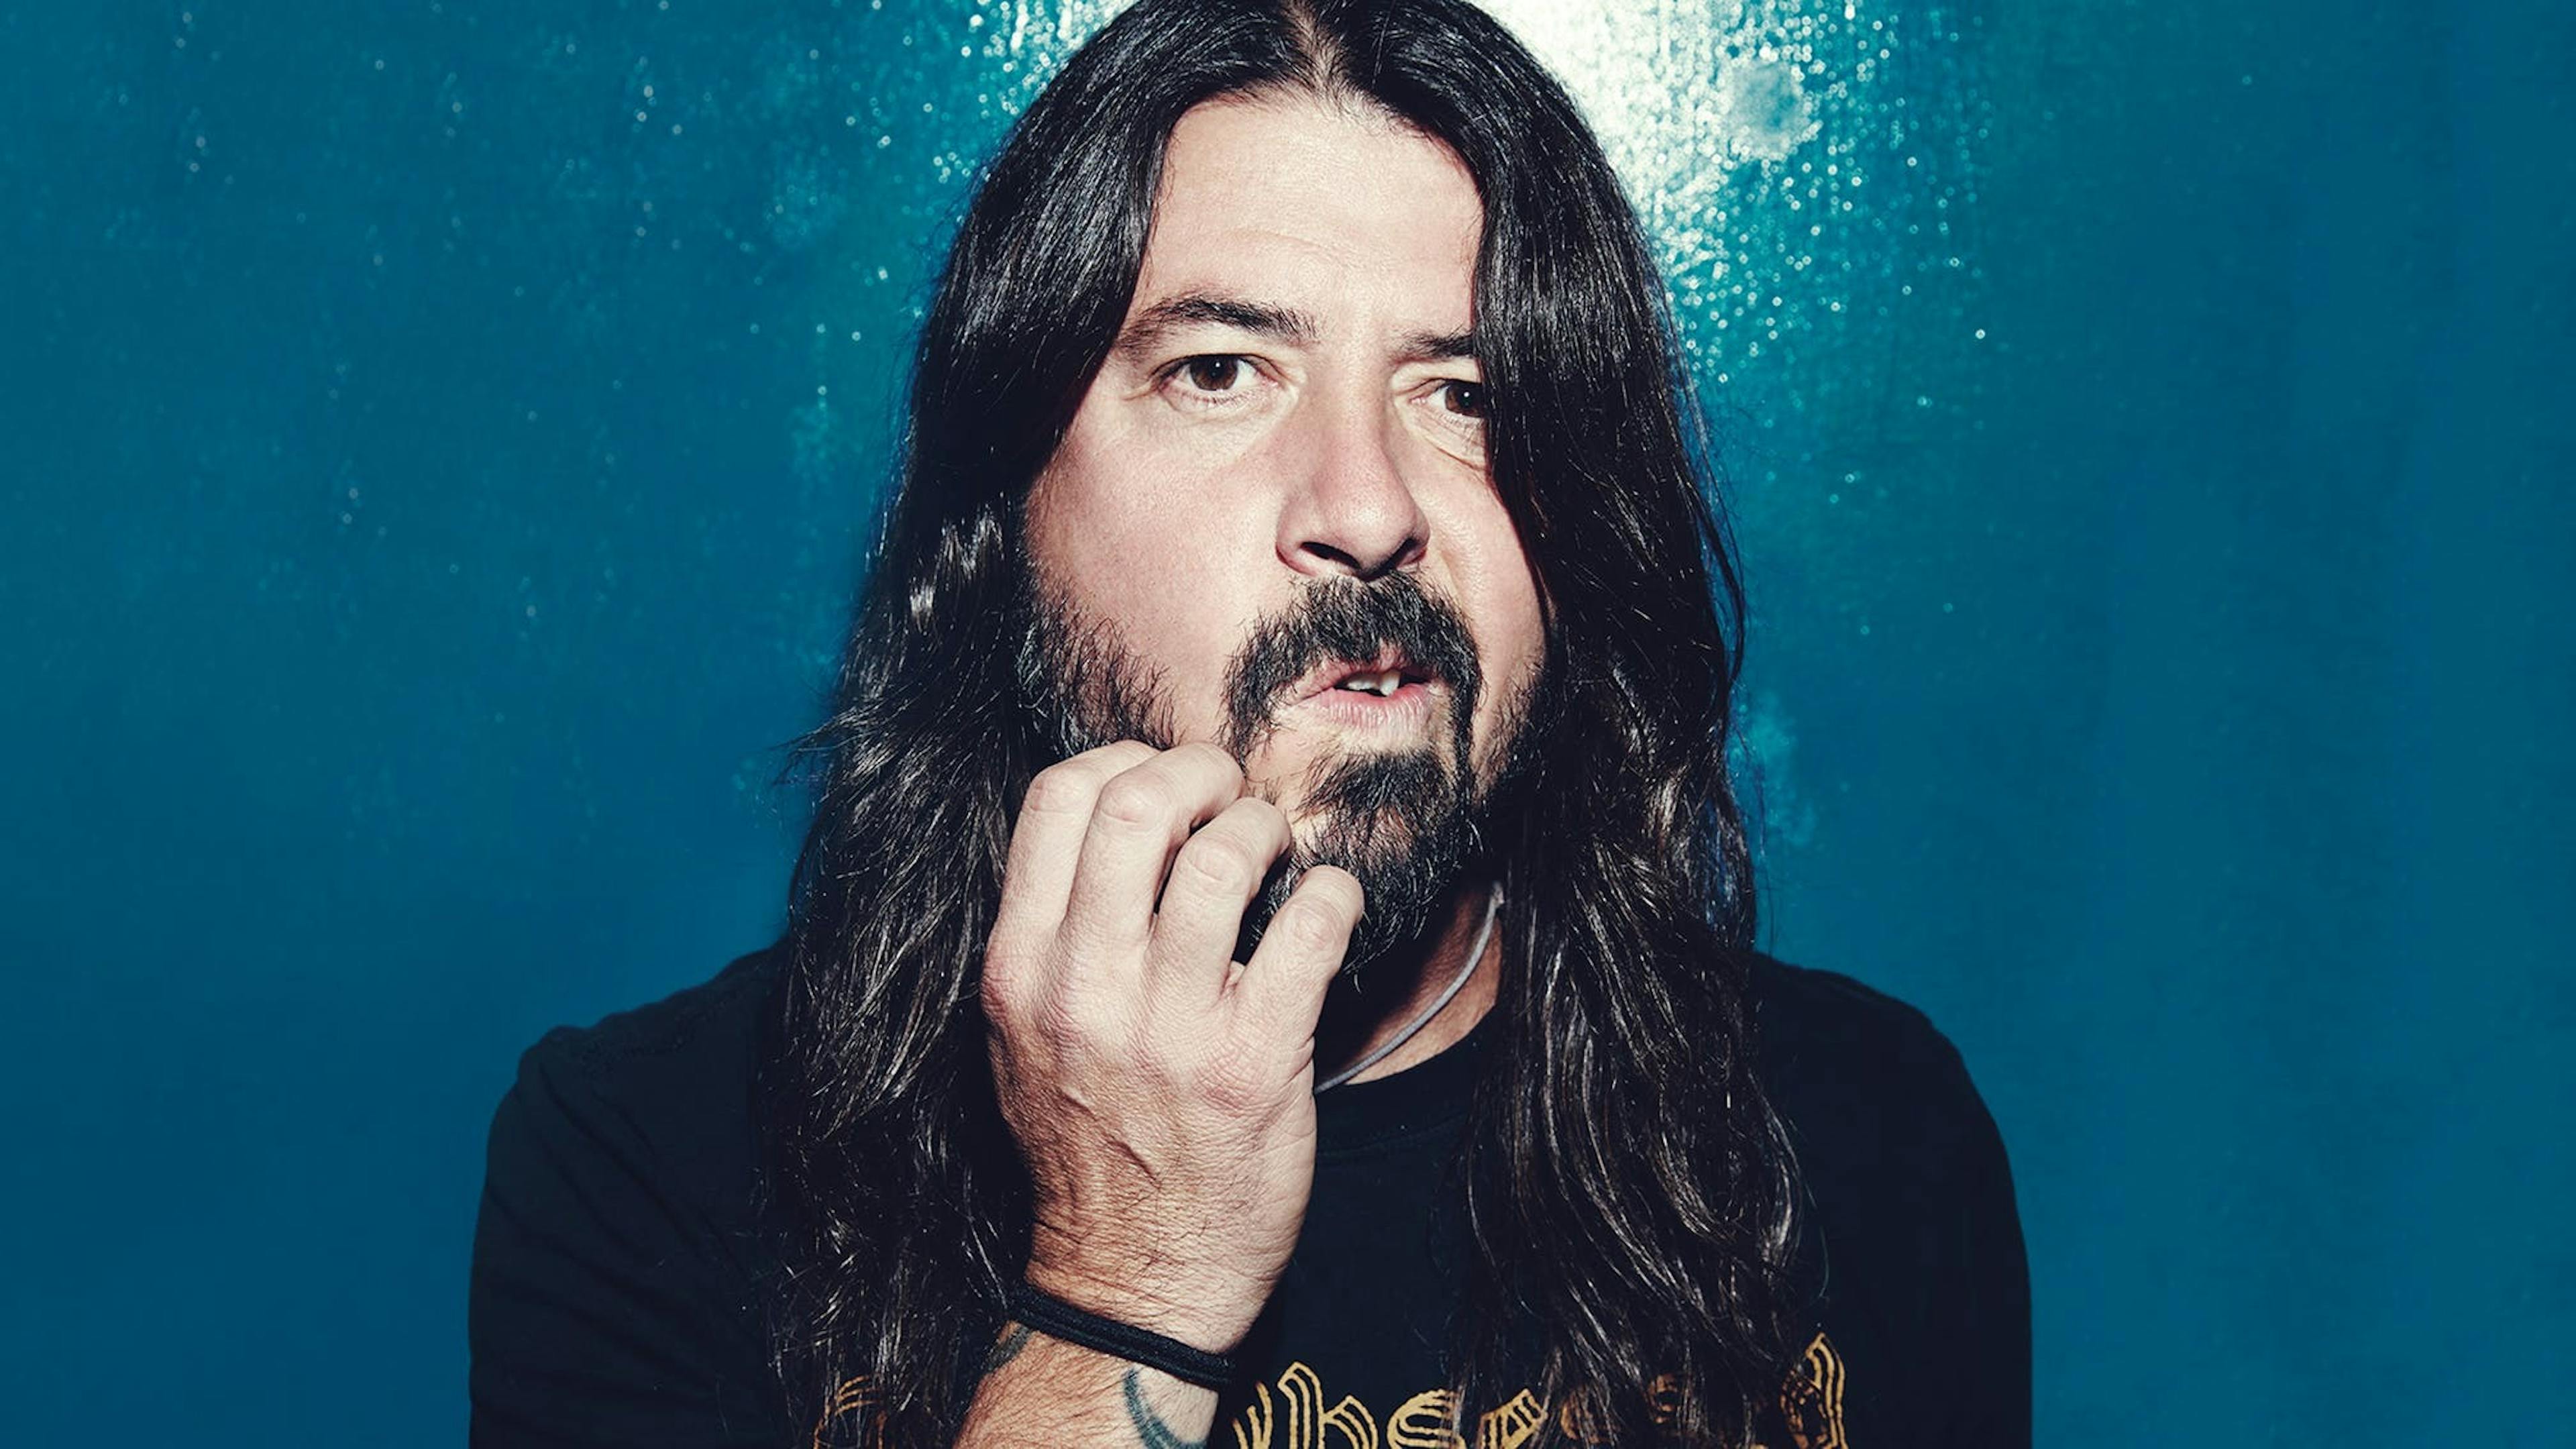 Dave Grohl Emails BBC Staff To Thank Them For Times Like These Charity Cover